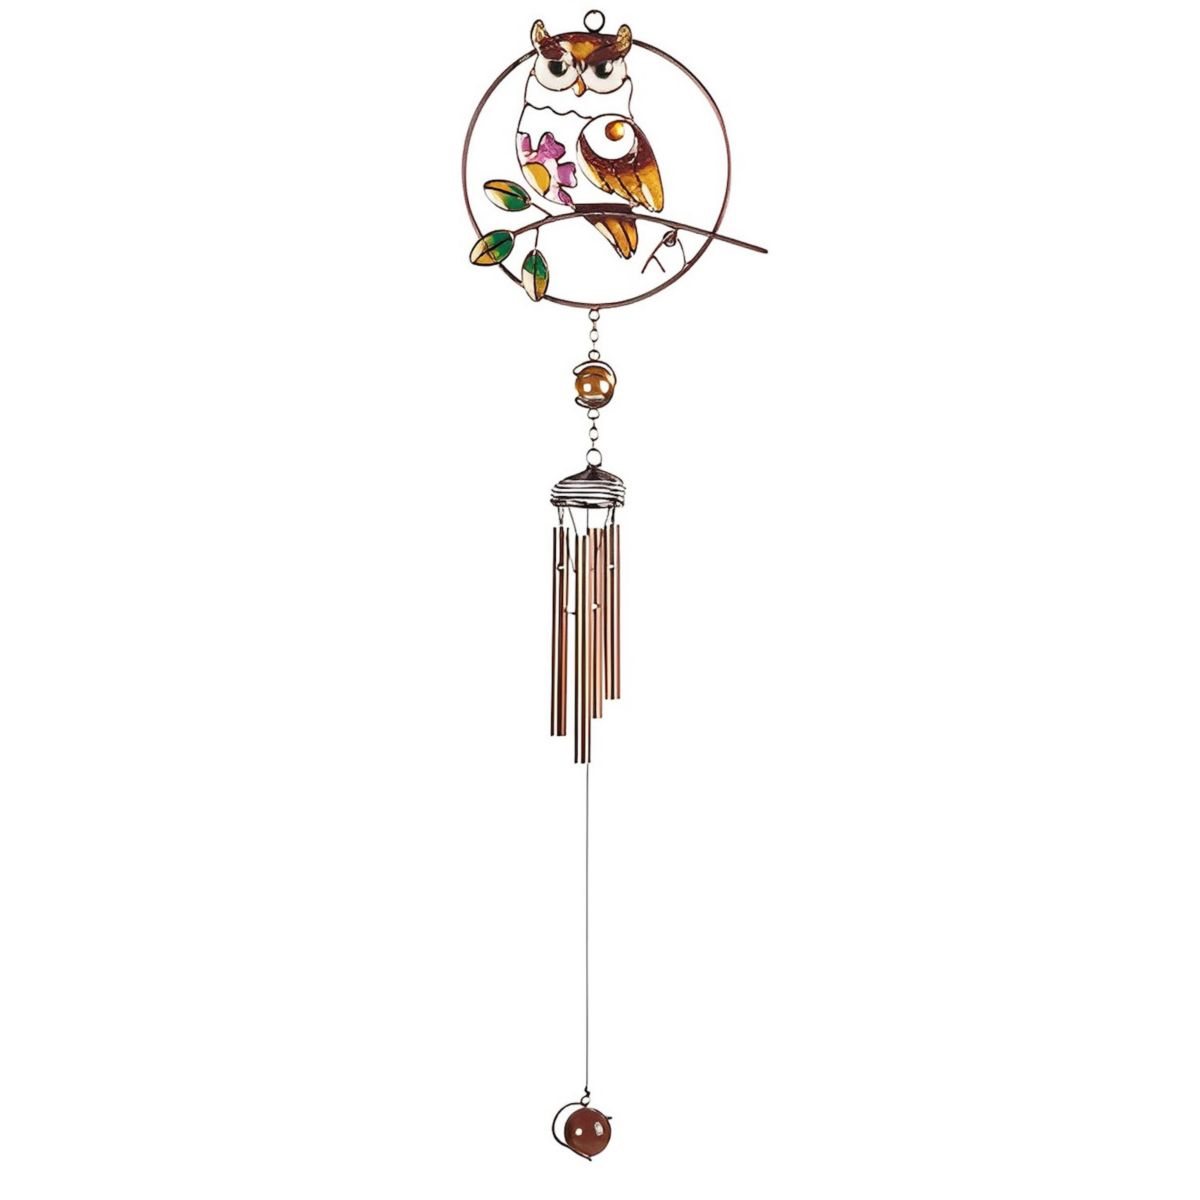 FC Design 28" Long Owl Wind Chime with Gem Garden Patio Decoration Perfect Gifts for Holiday F.C Design